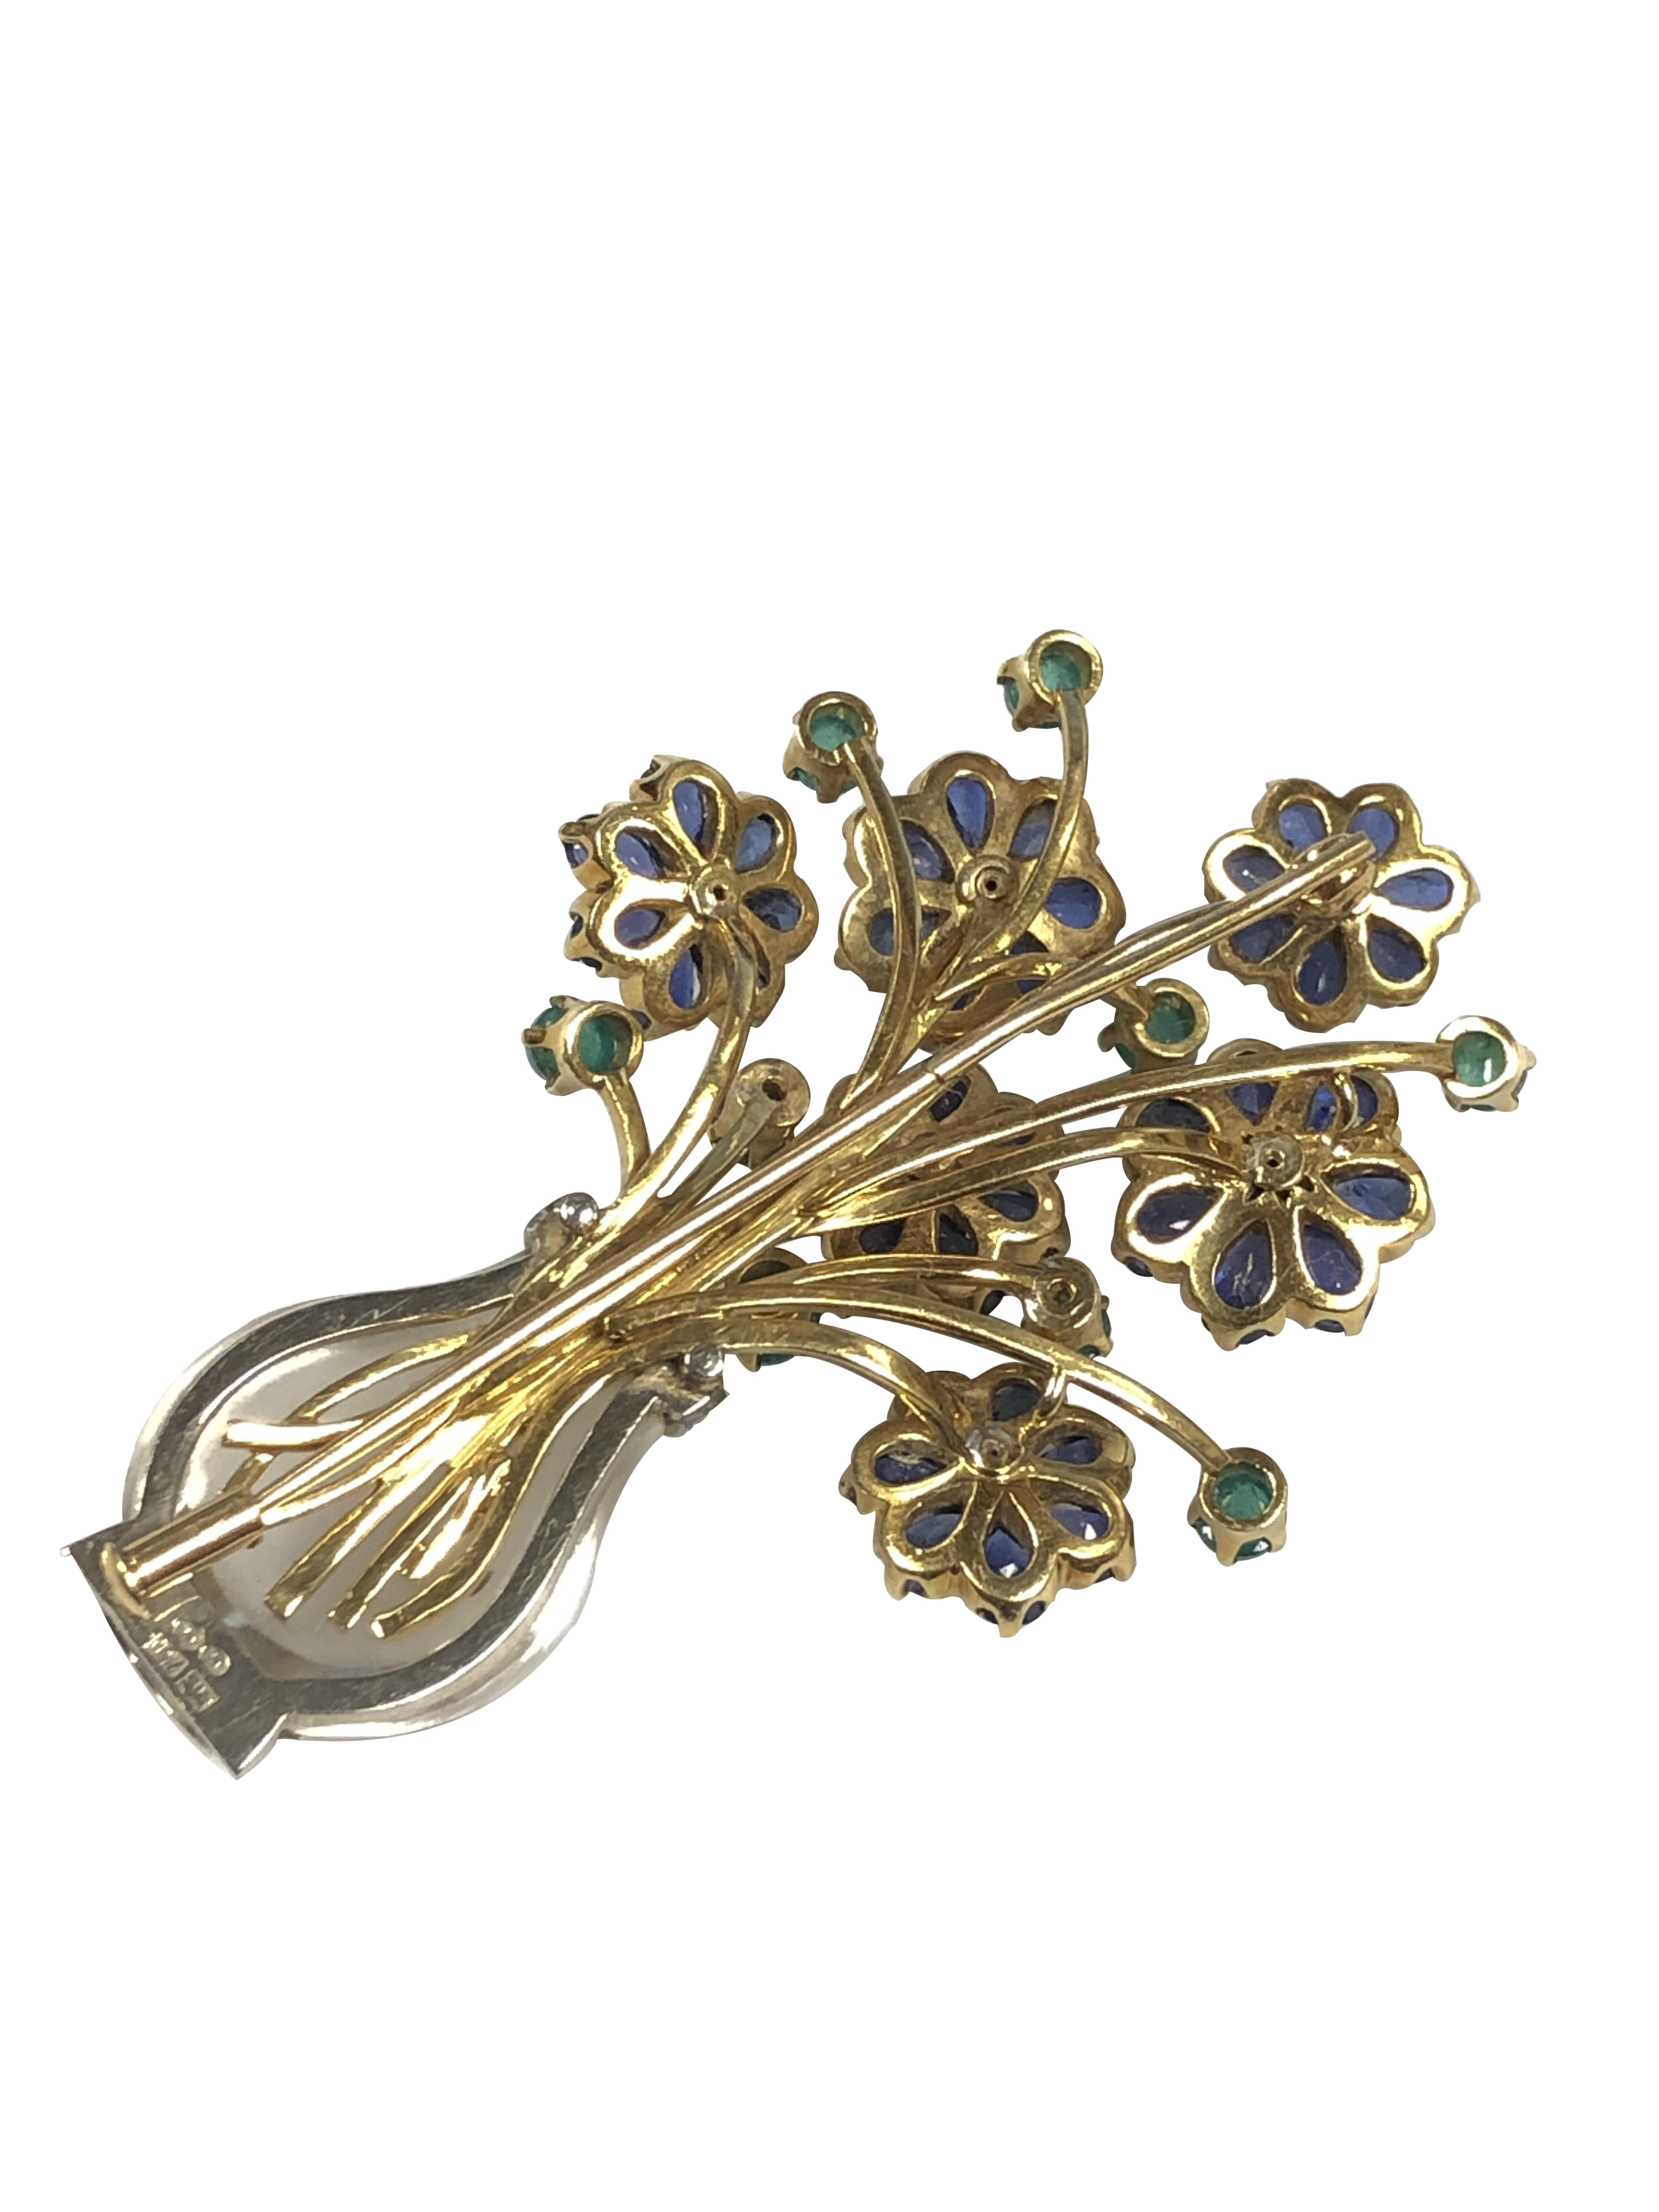 Circa 1970 18K Yellow and White Gold Giardinetto Brooch, measuring 2 5/8 inches in length and 1 1/2 inches wide. The Rock Crystal vase portion is set in White Gold and has diamond mounted sections, the Yellow gold Flower and stems top is set with